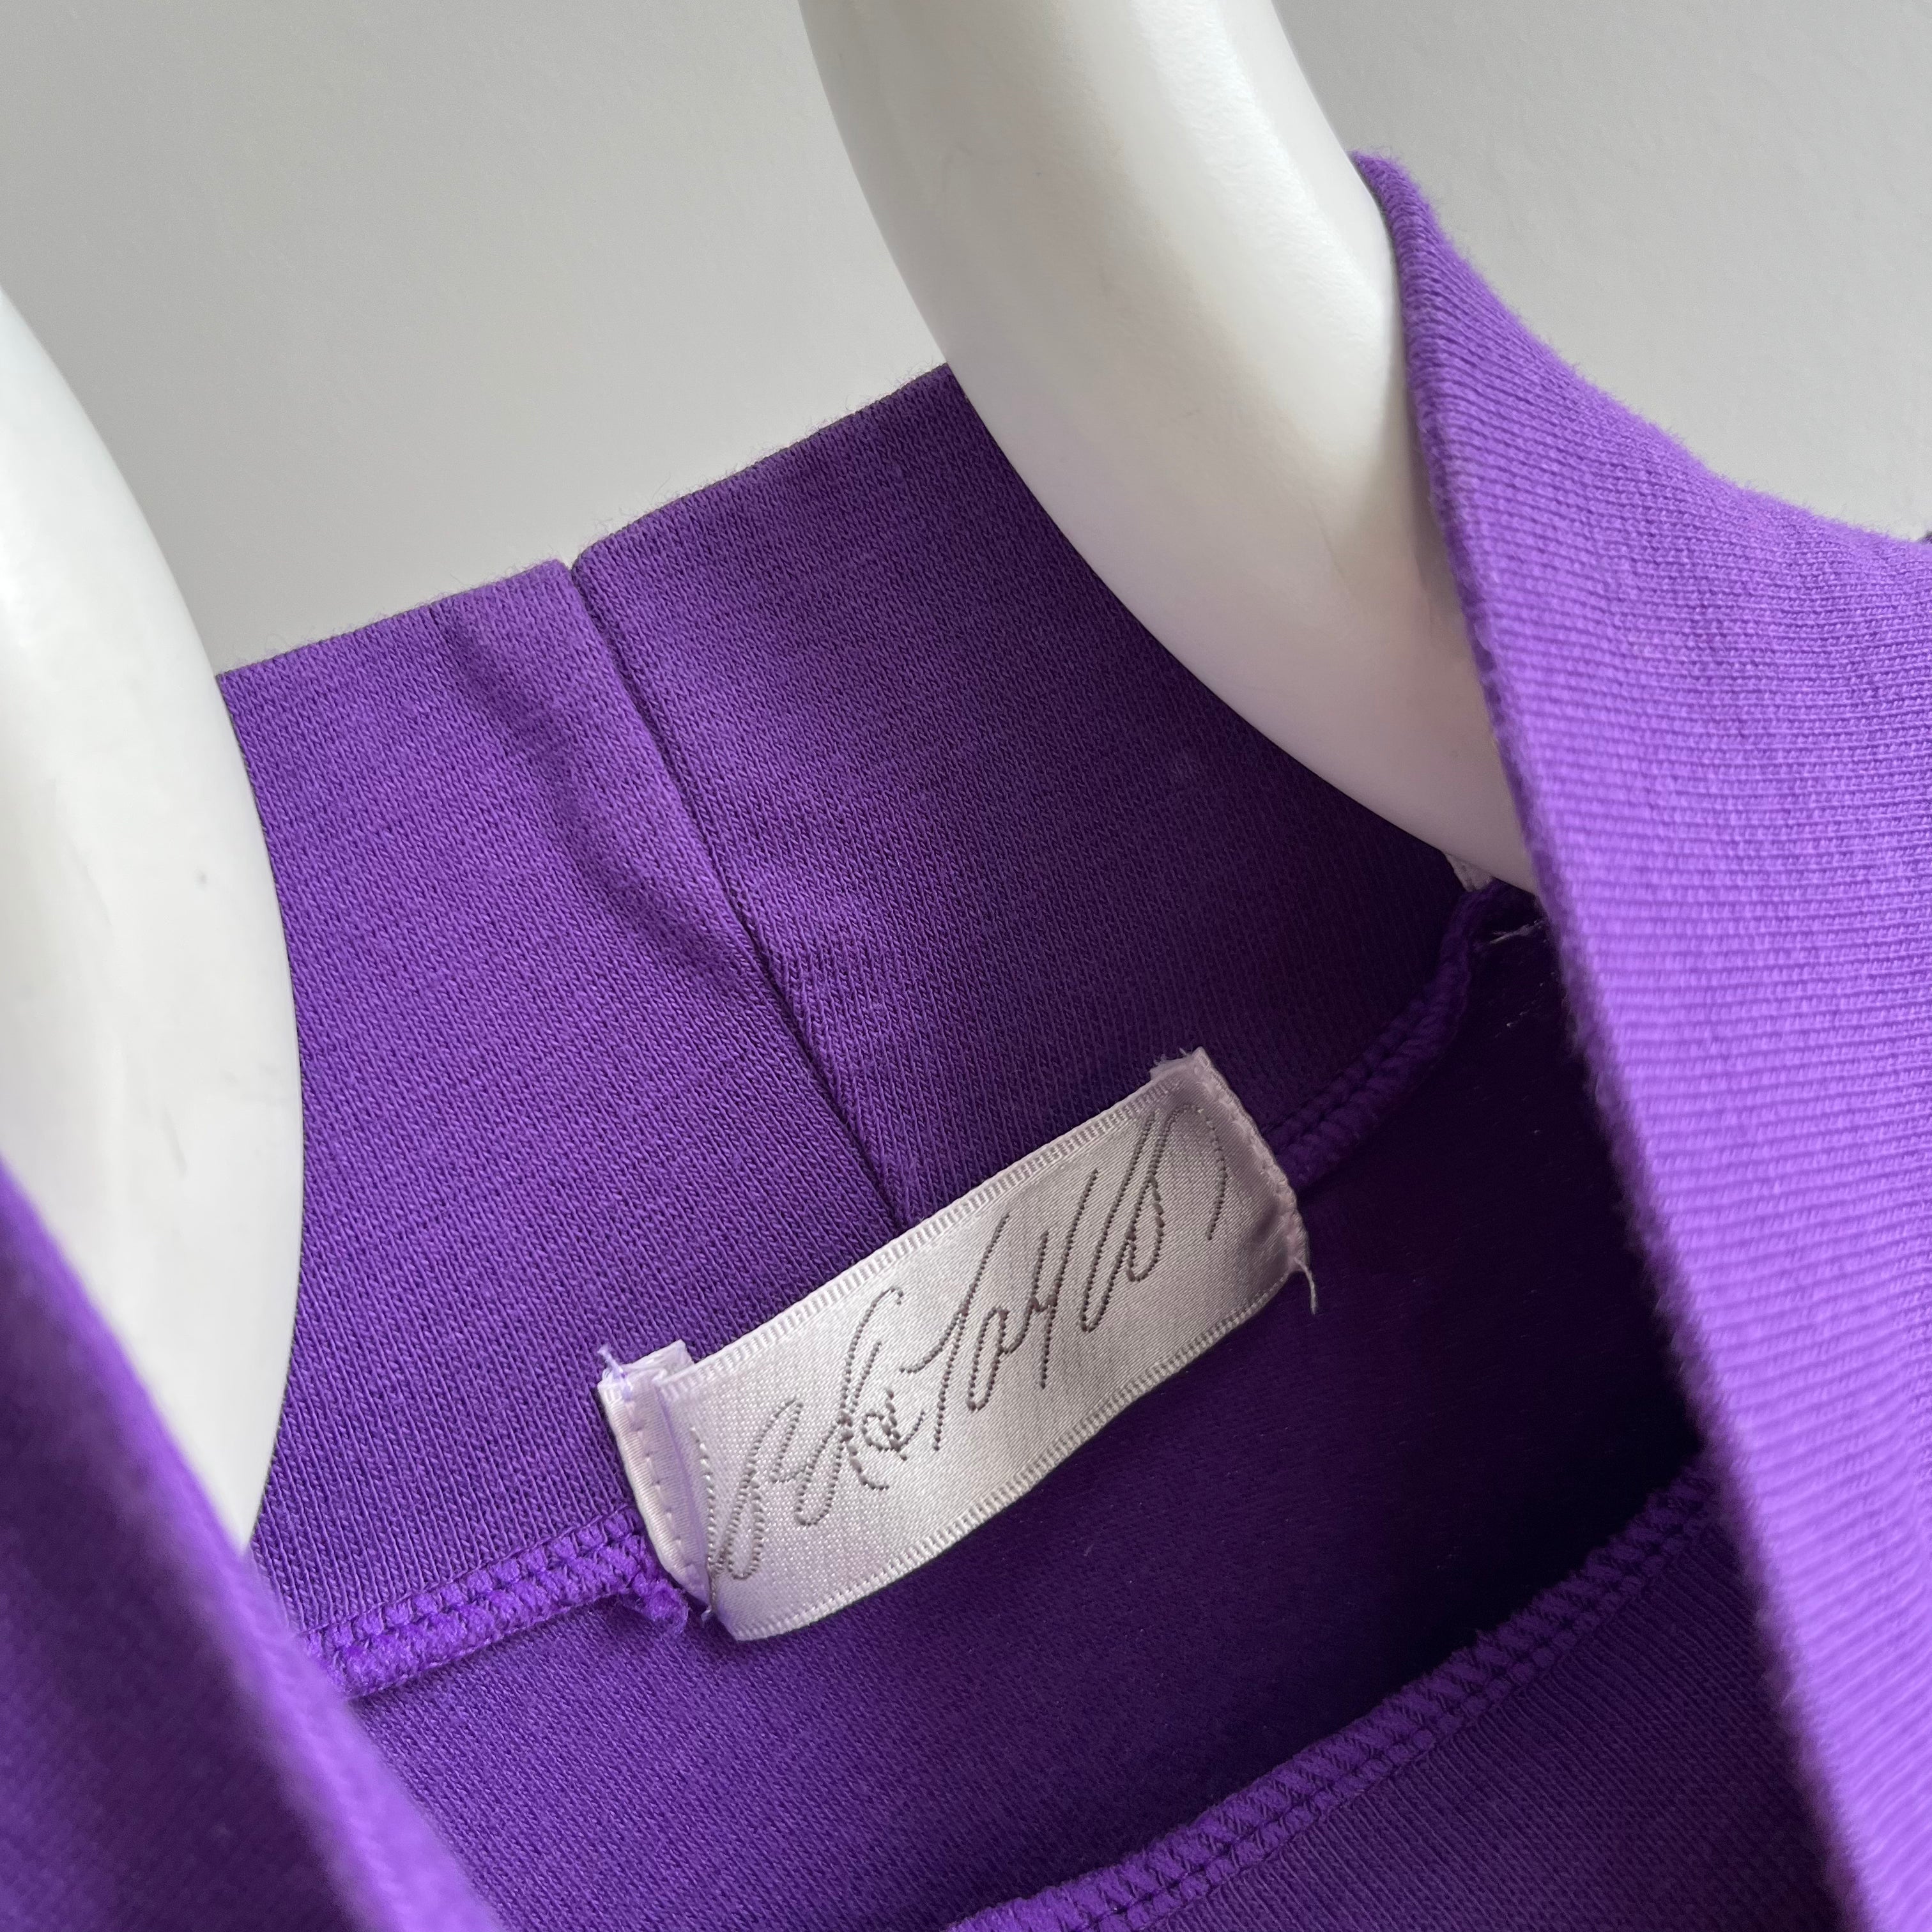 1990s Lord And Taylor Jersey Mock Neck Long Sleeve Purple Shirt